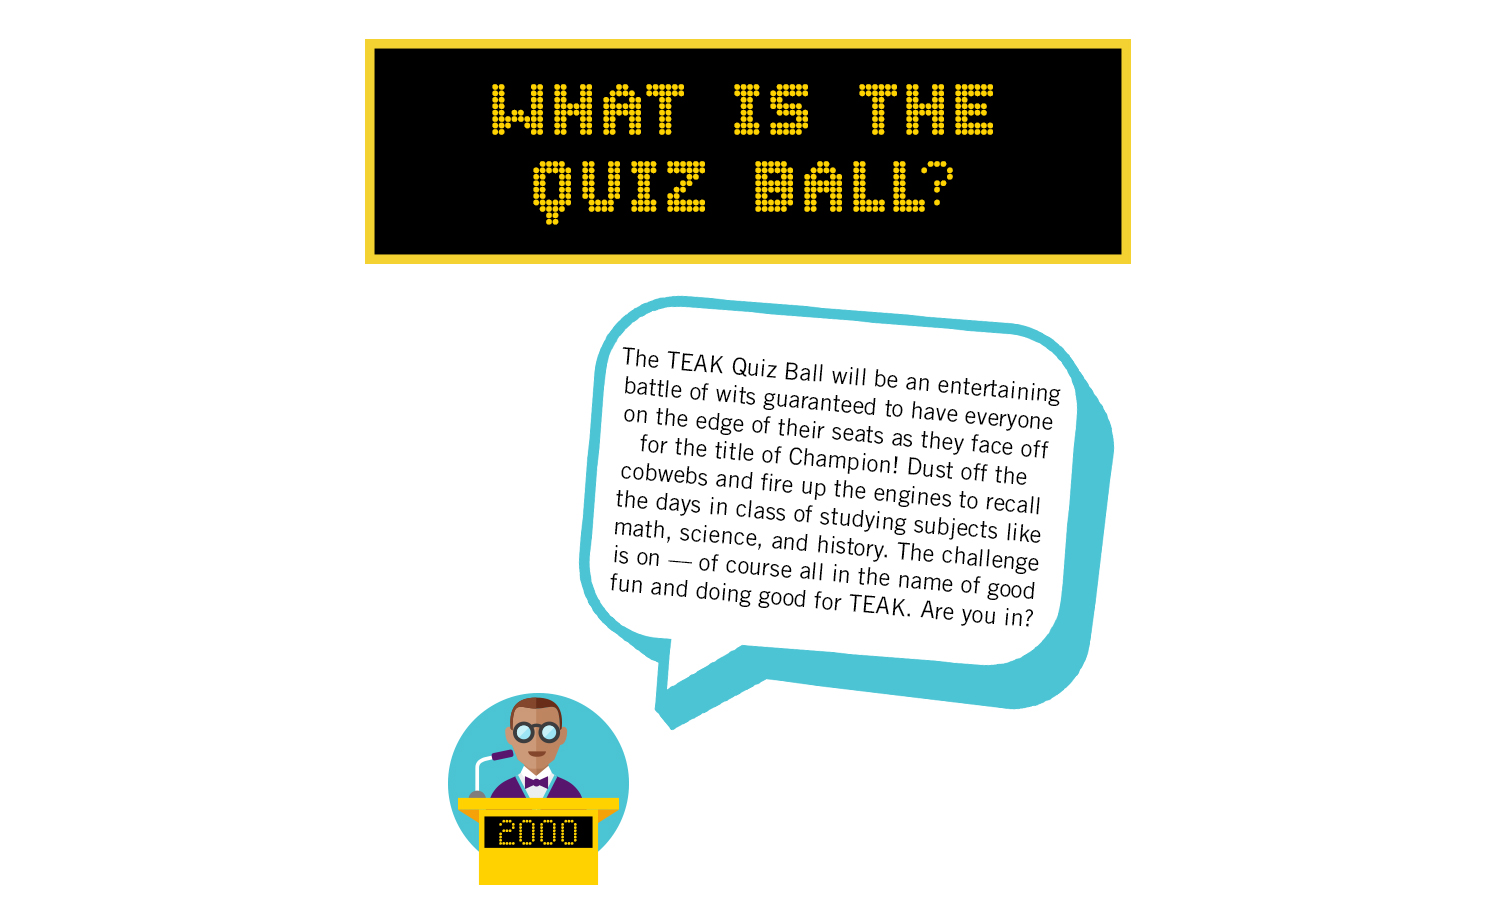 What is the Quiz Ball